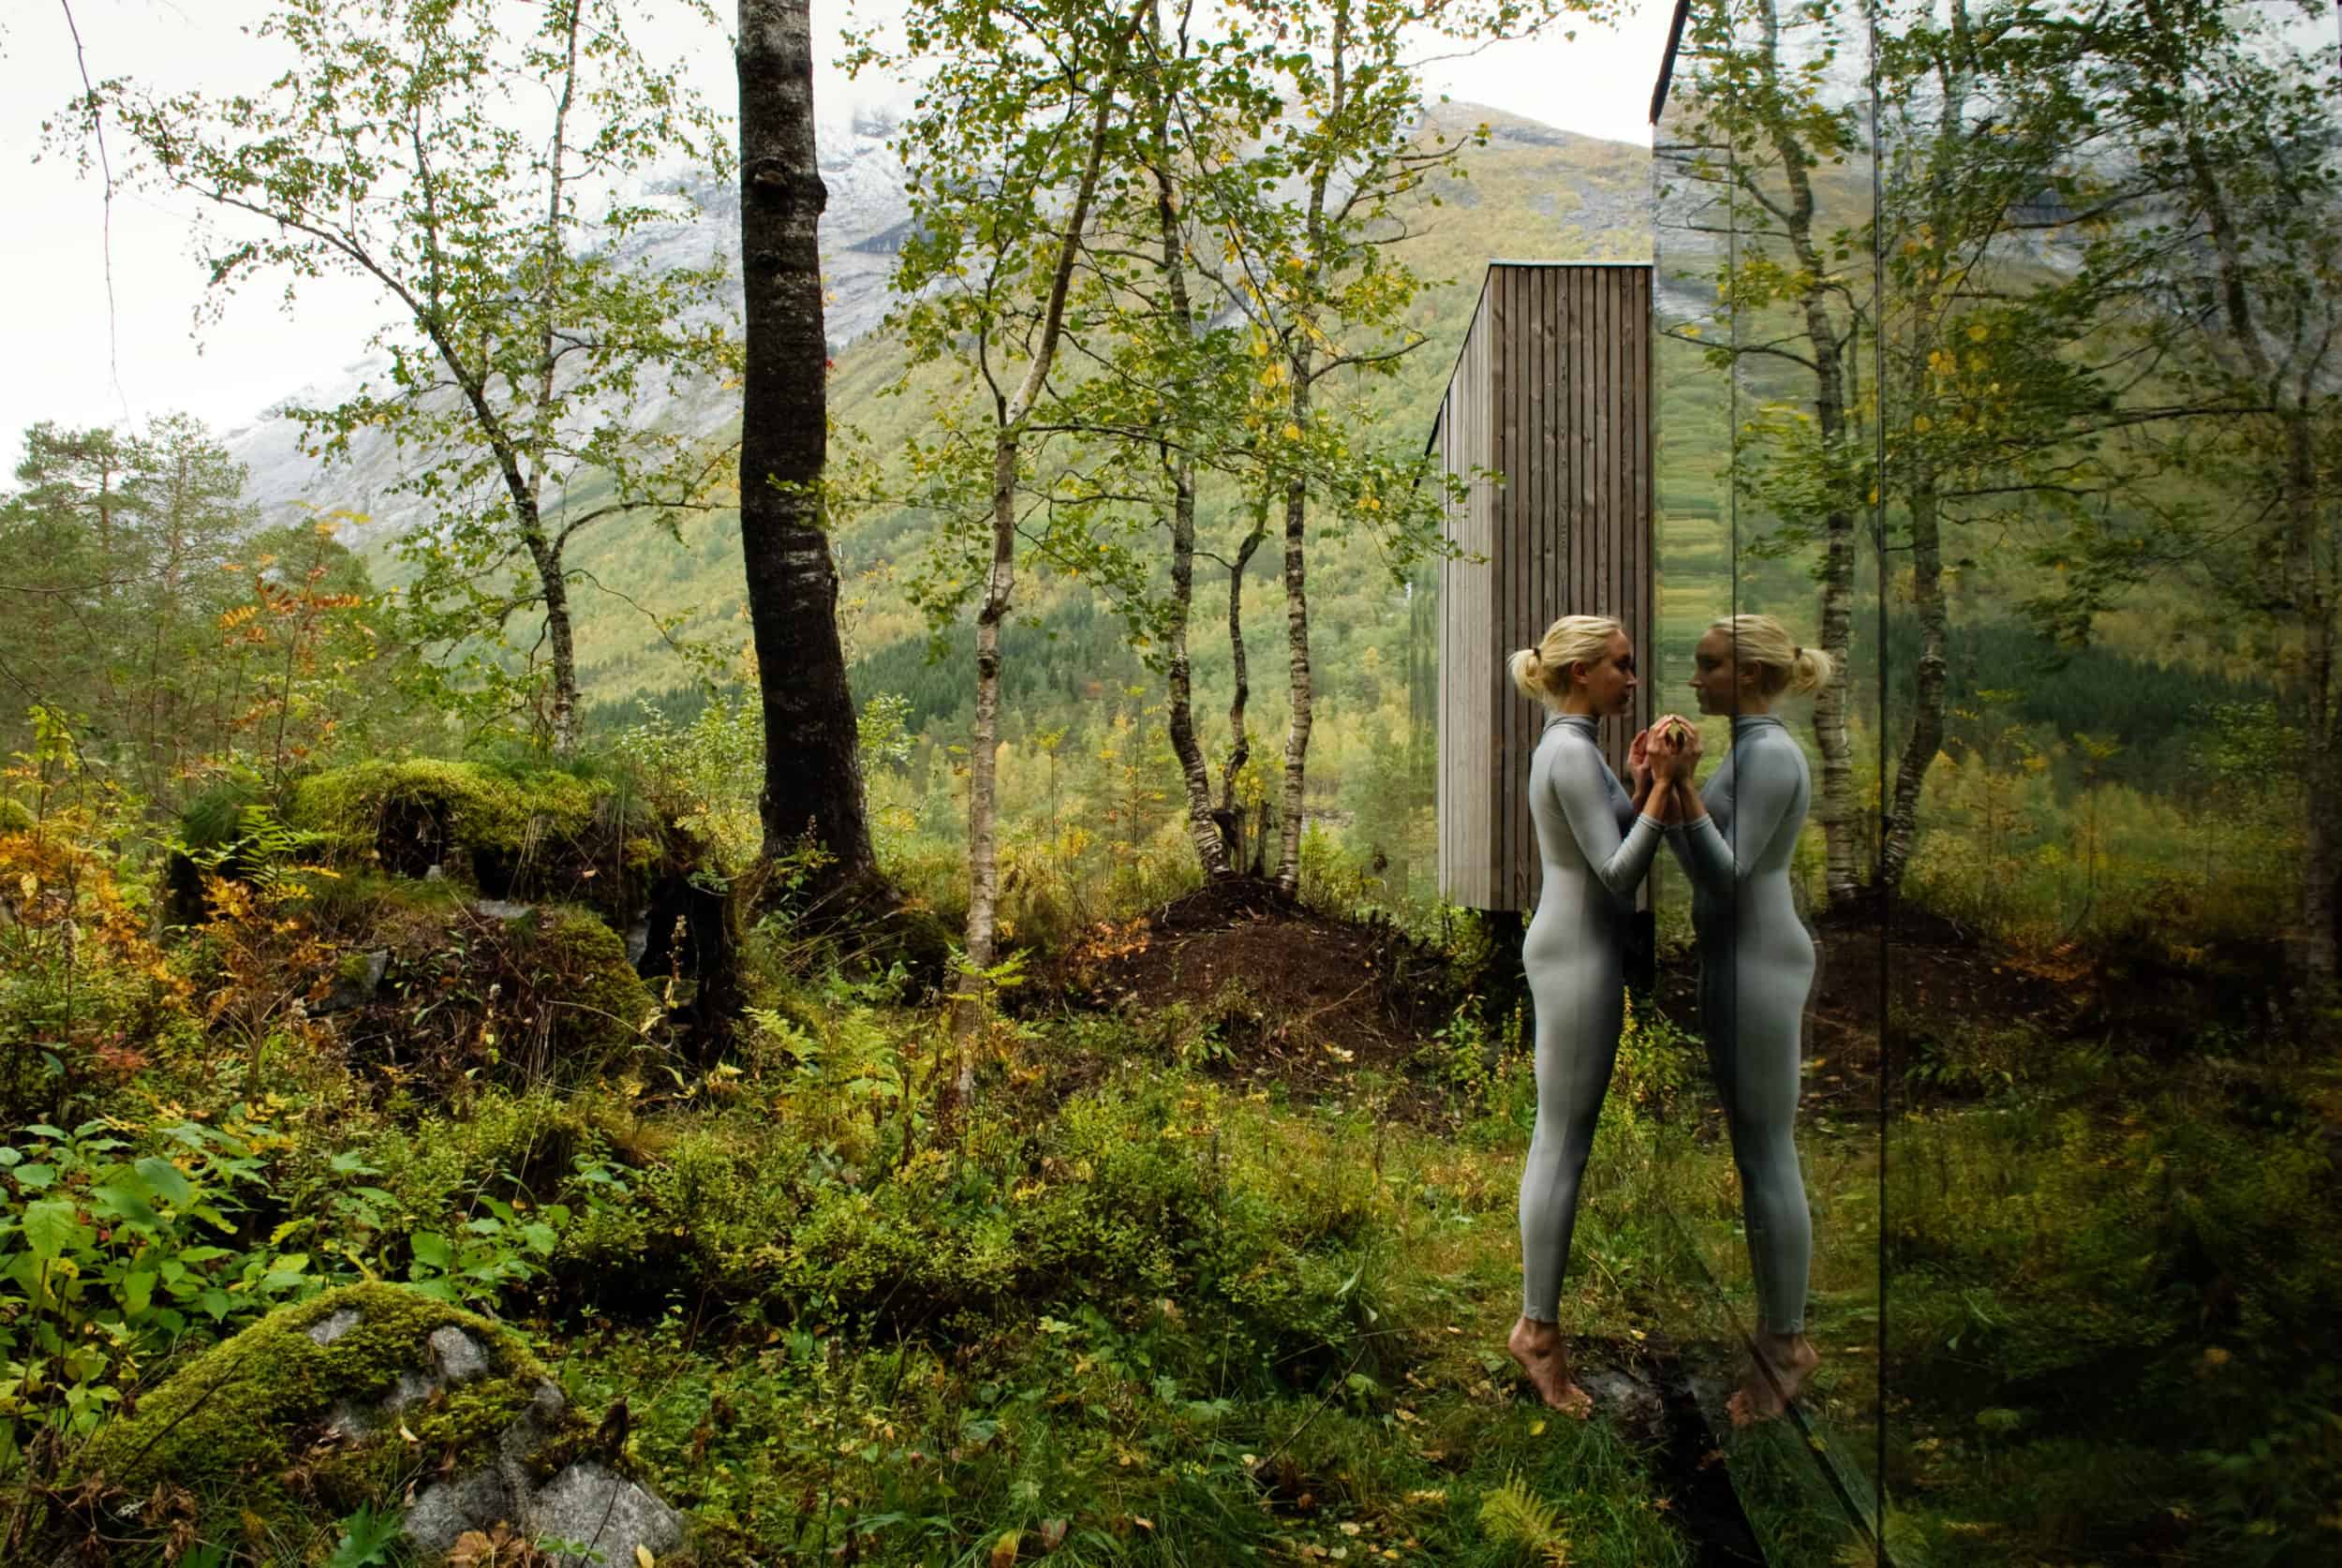 Woman looking at herself in a mirror in the woods for Juvet Landscape Hotel.